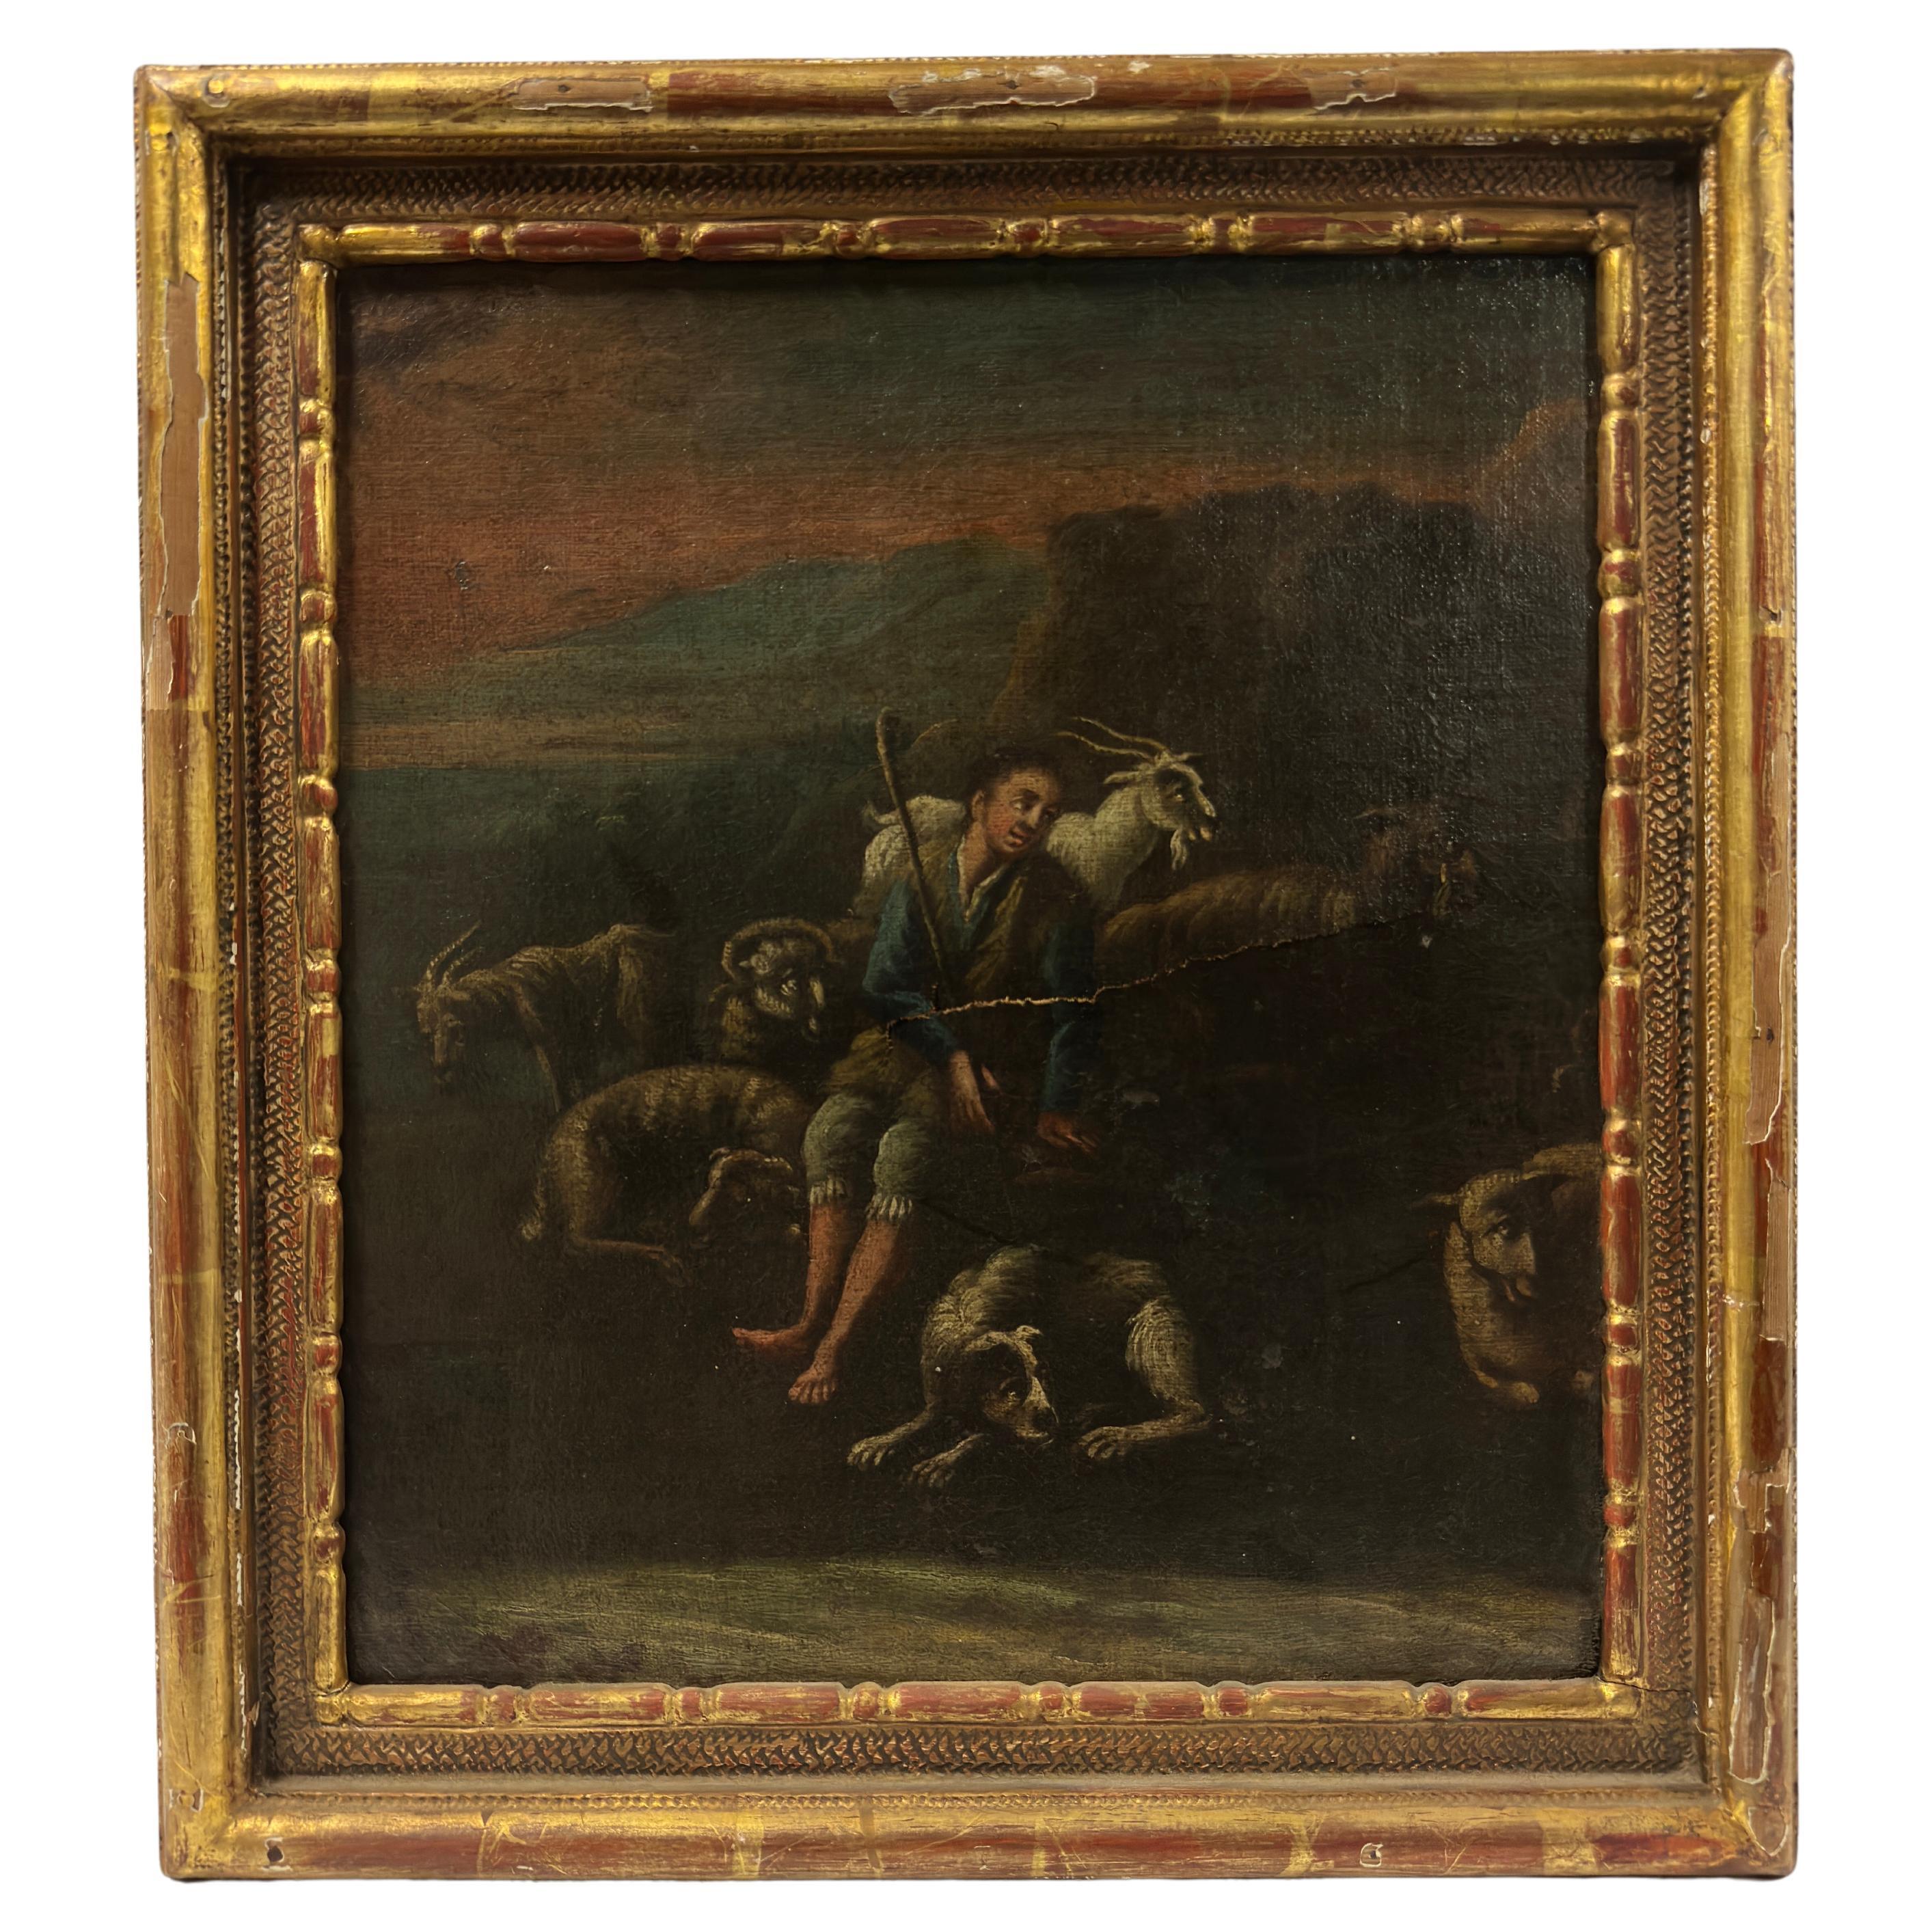 19th Century English Painting Entitled "The Shepherd" For Sale